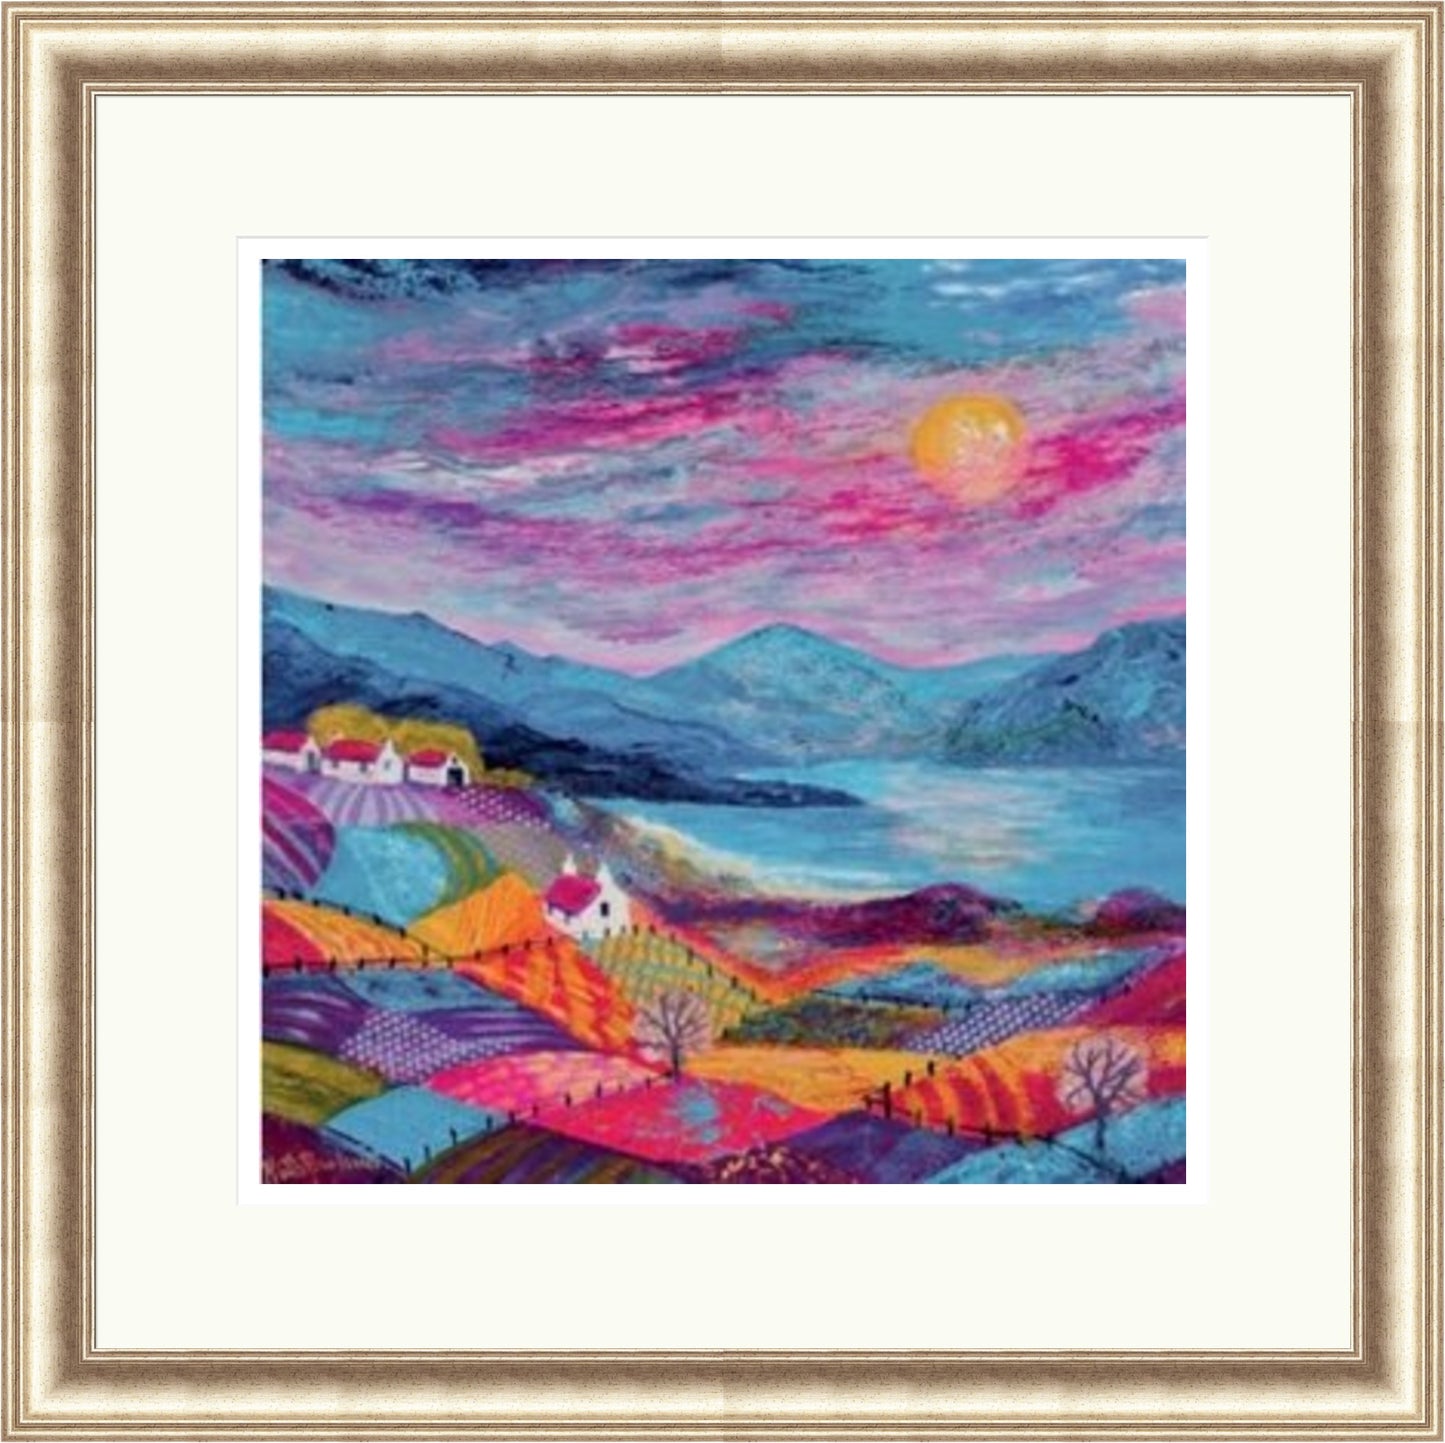 Idyllic View (Limited Edition) by Kathleen Buchan